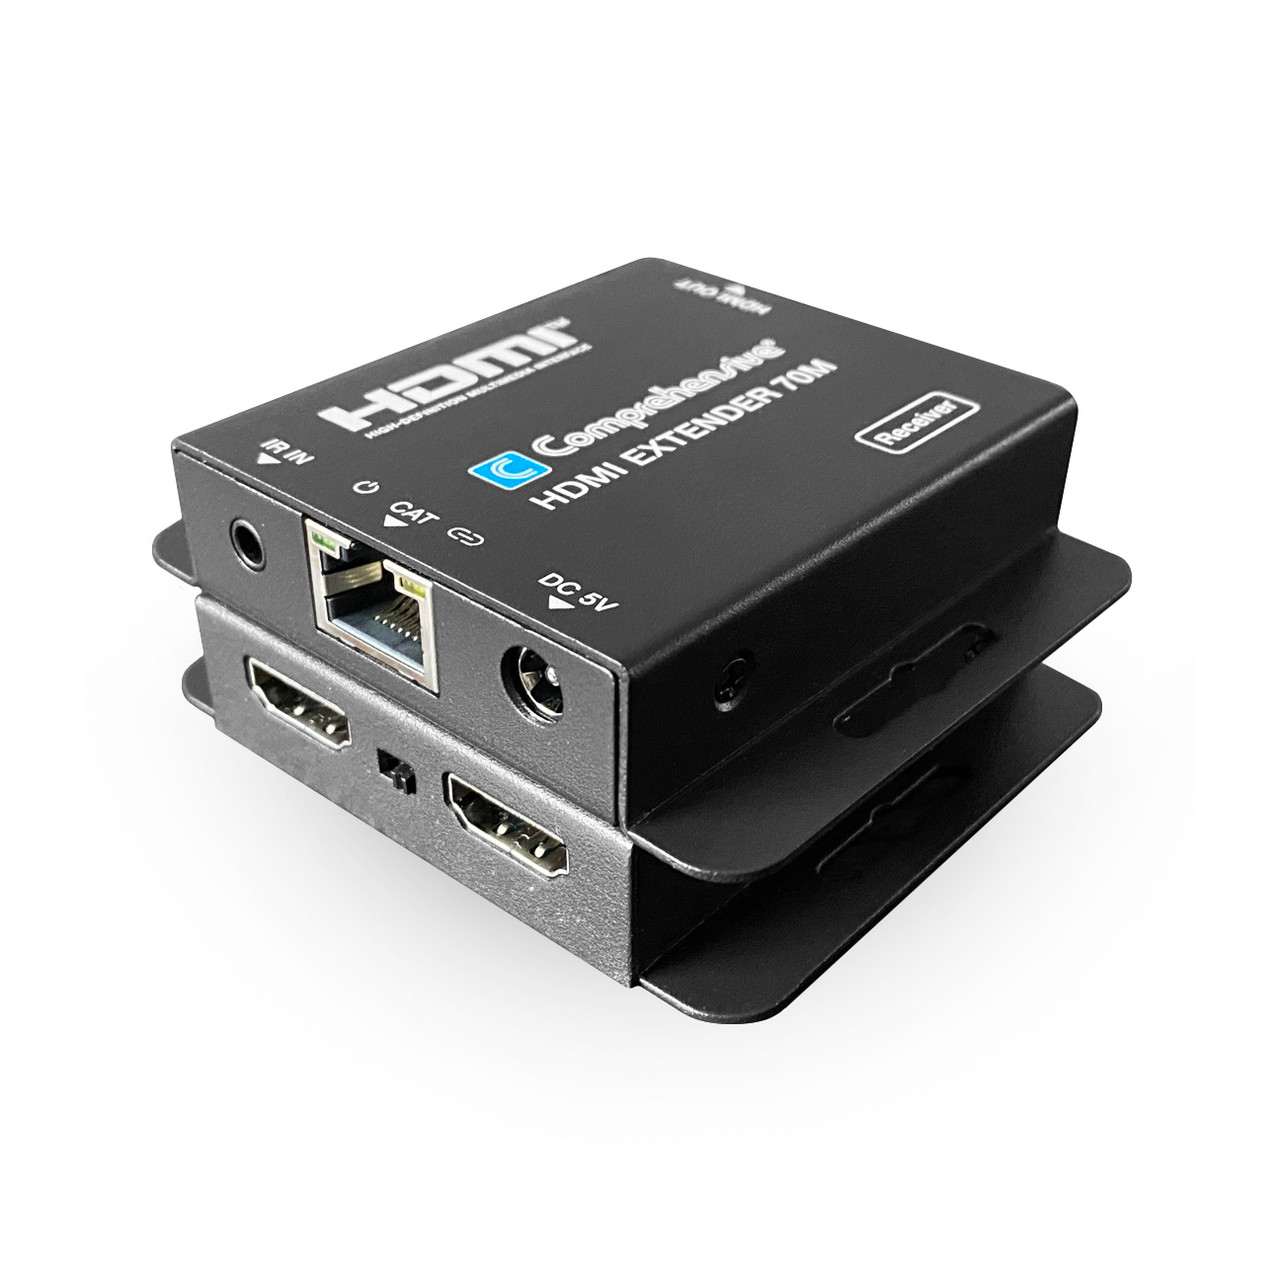 4K HDMI extender with IR control up to 130ft (40m), 1080p 230ft (70m)